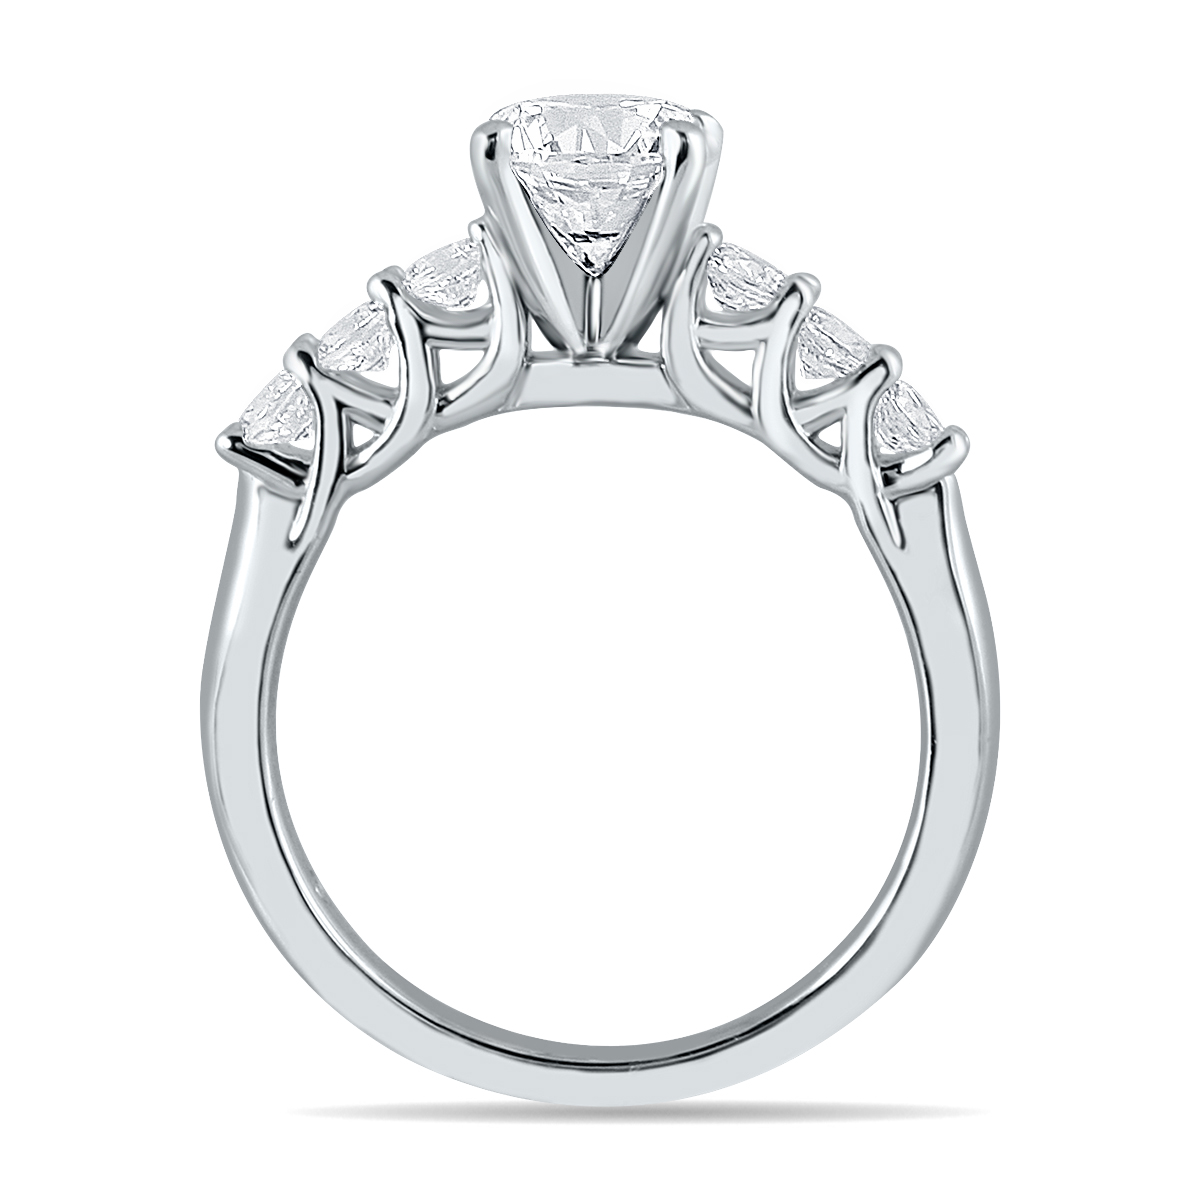 szul.com AGS Certified 1 3/8 Carat TW Seven Stone Engagement Ring in 14K White Gold (J-K Color, I2-I3 Clarity